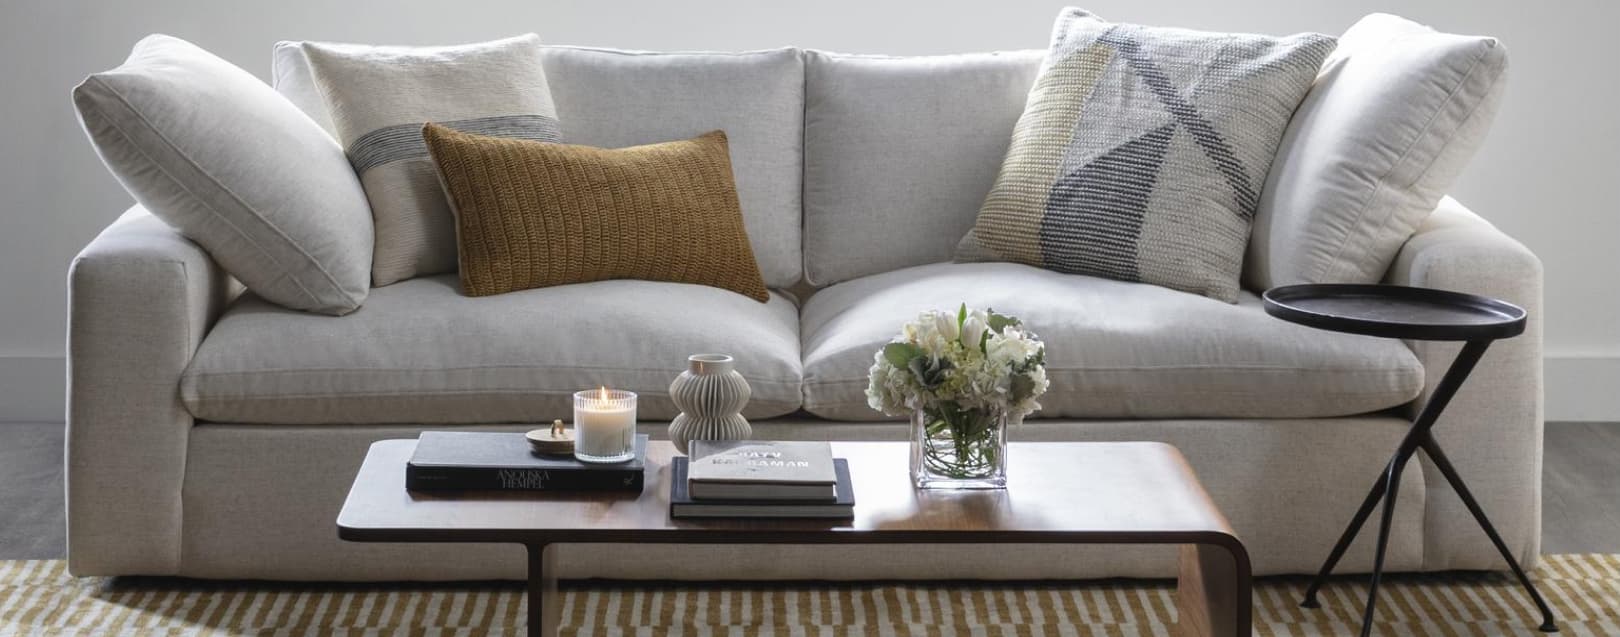 The Best Foam to Use for Sofa Cushions: Good, Better, Best